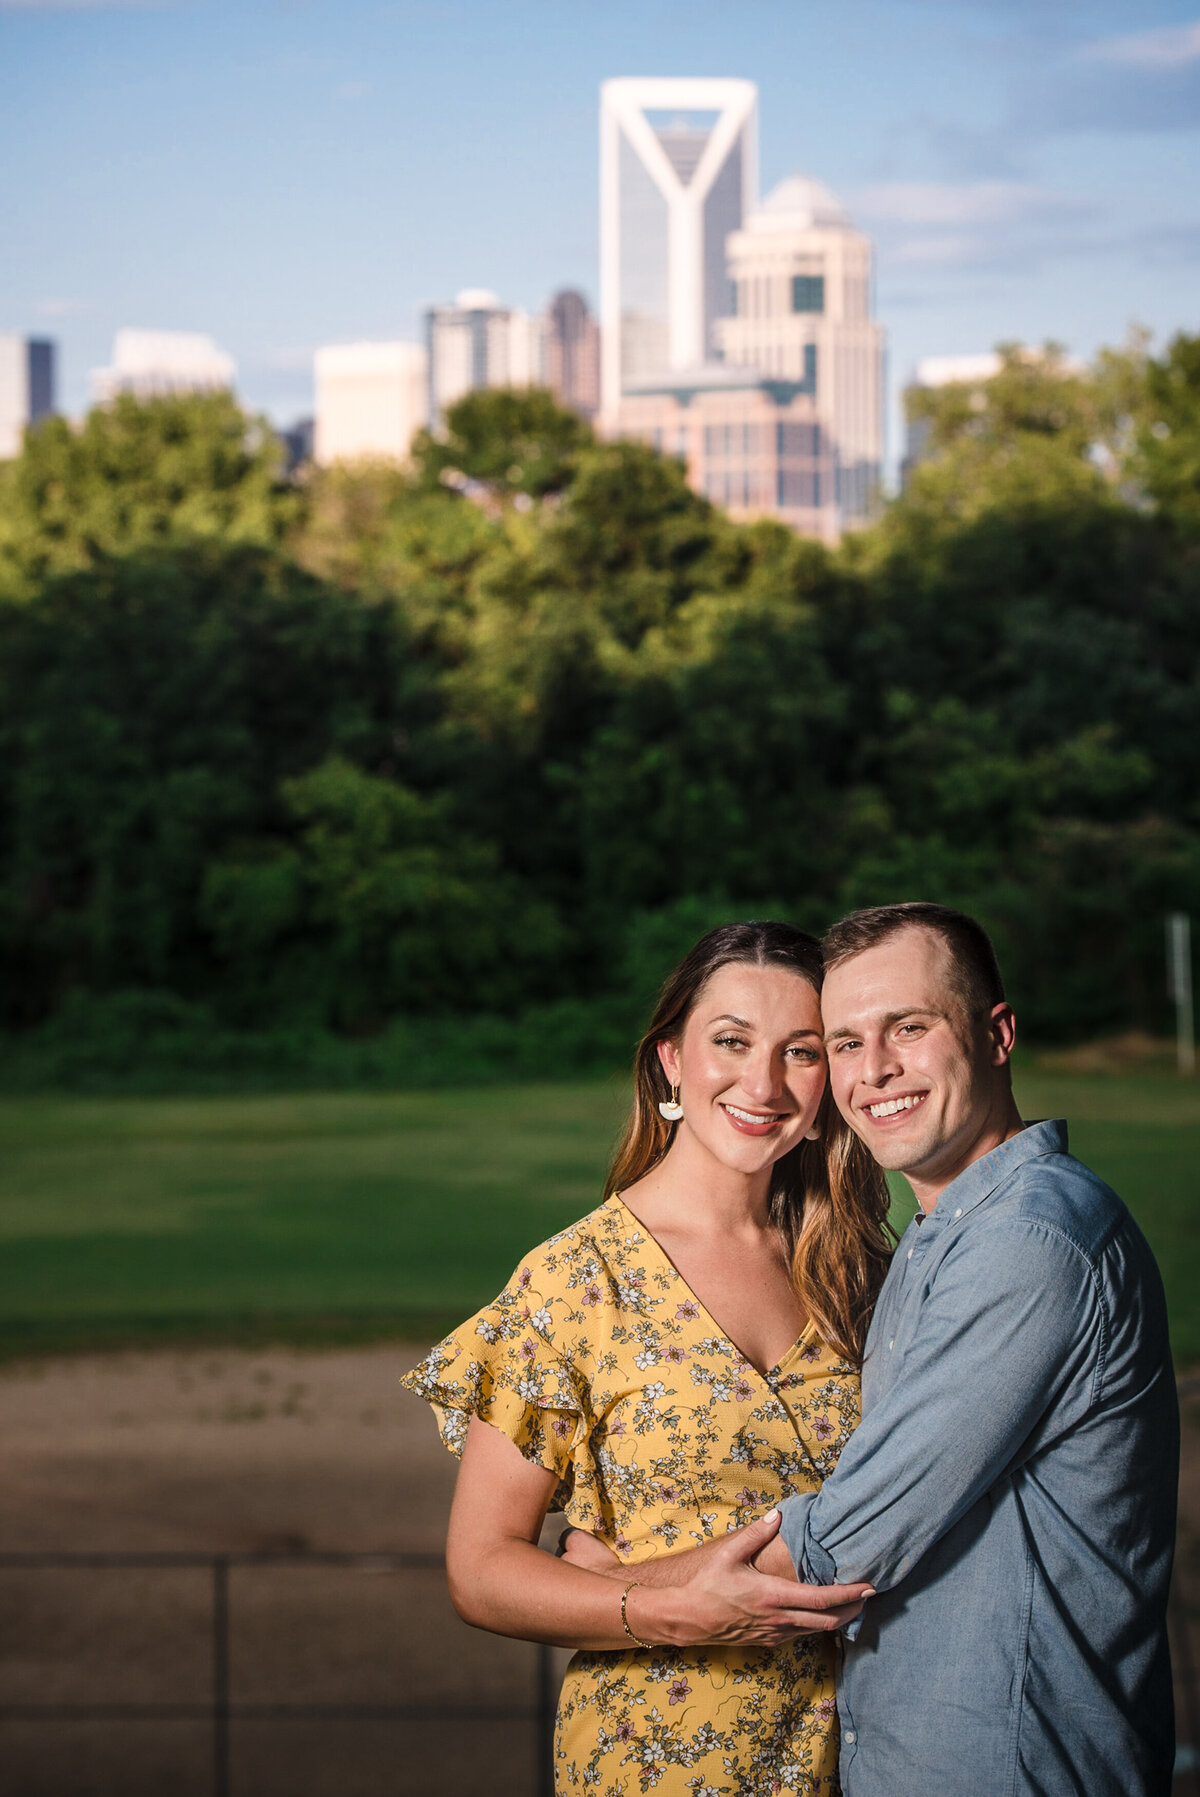 Engaged-couple-smiling-and-looking-at-the-camera-with-the-Charlotte-skyline-in-the-background-at-Bryant-Park